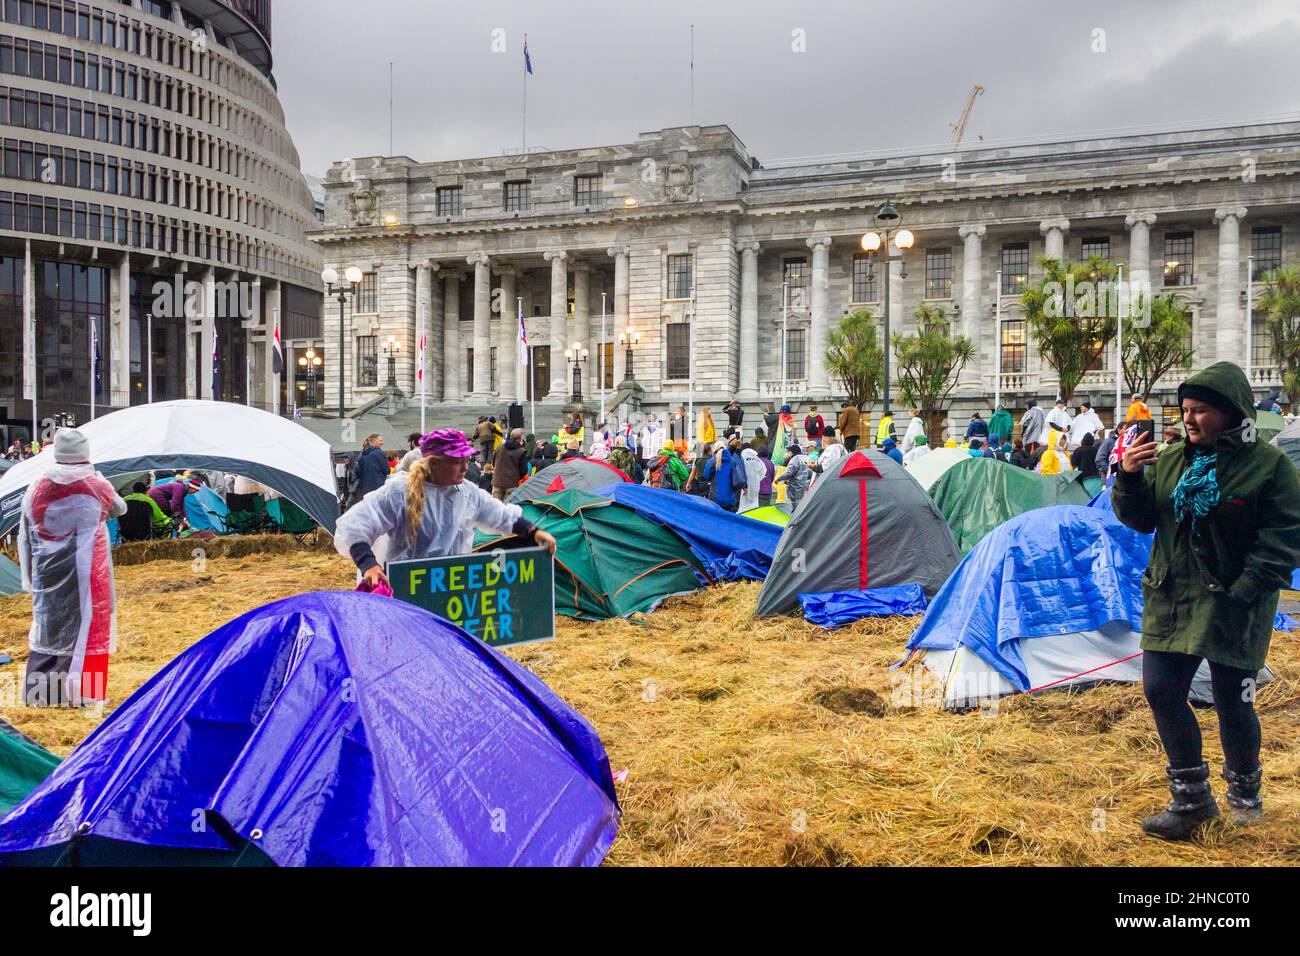 Wellington, New Zealand. February 13, 2022: Protestors gathered at Parliament during the anti-mandate convoy occupation. Stock Photo